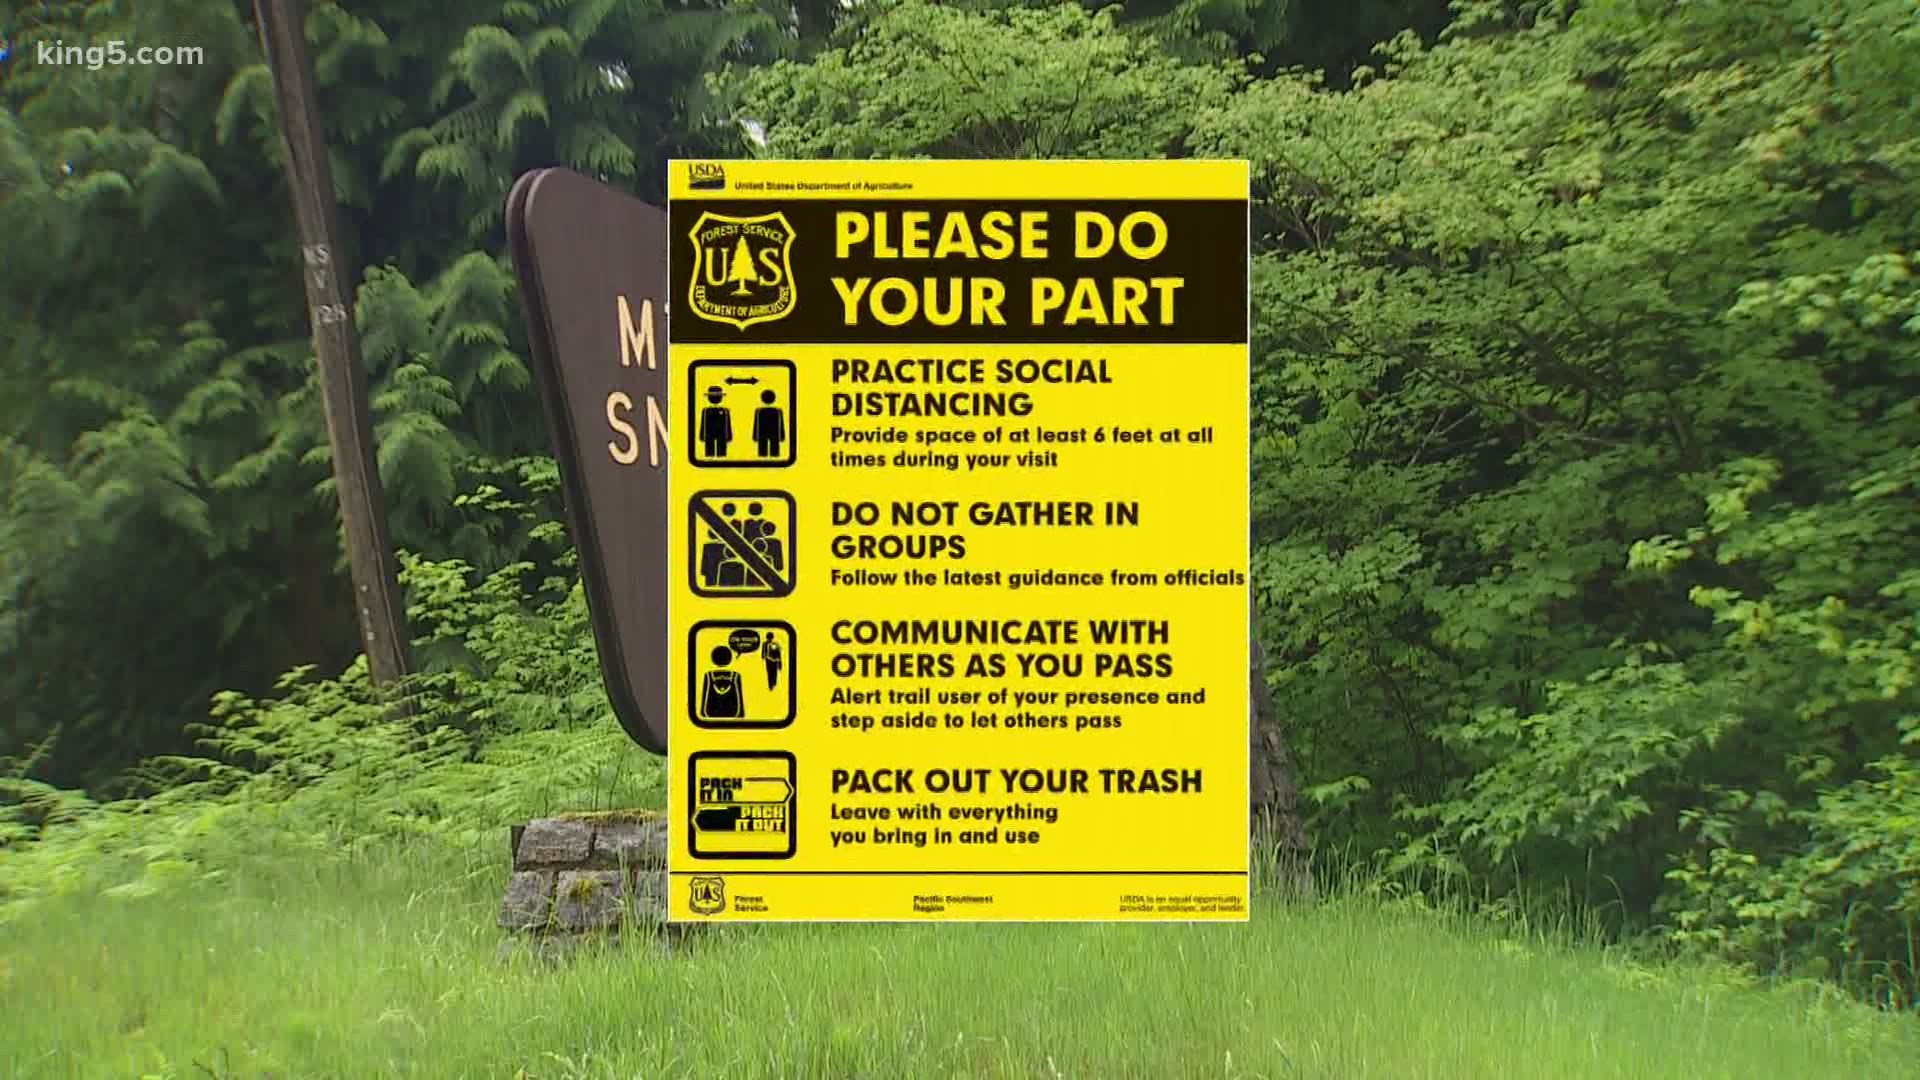 Many trailheads and parks have reopened in time for the holiday weekend, but camping is still not allowed during the pandemic.